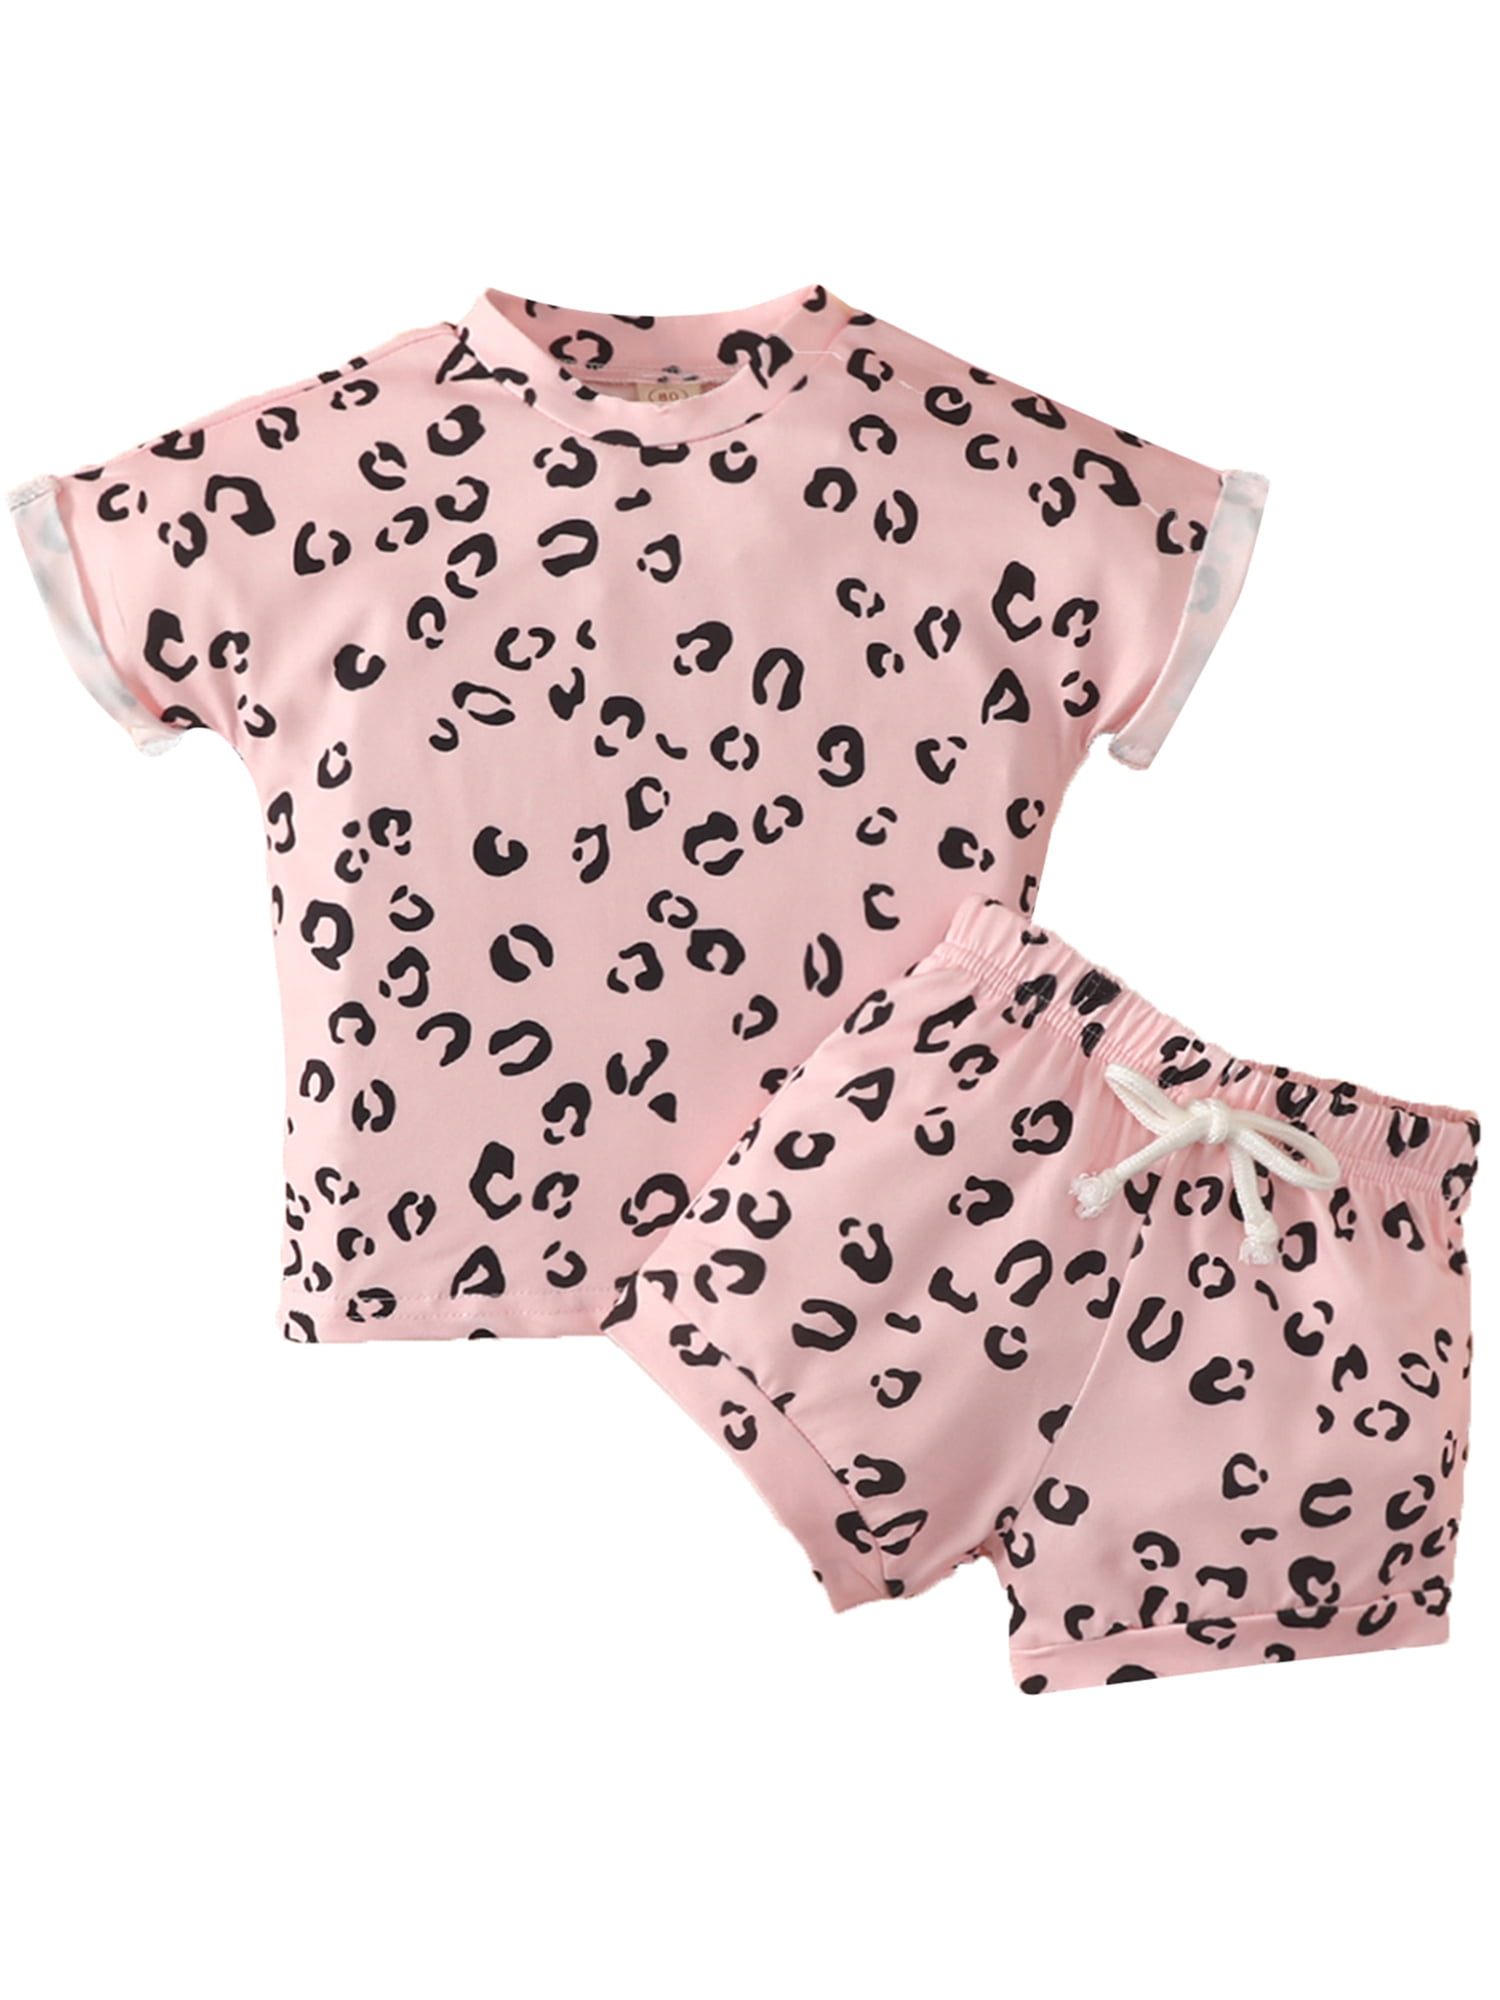 Toddler Baby Girls Summer Outfits Short Sleeve Top+Shorts Leopard Print Clothing